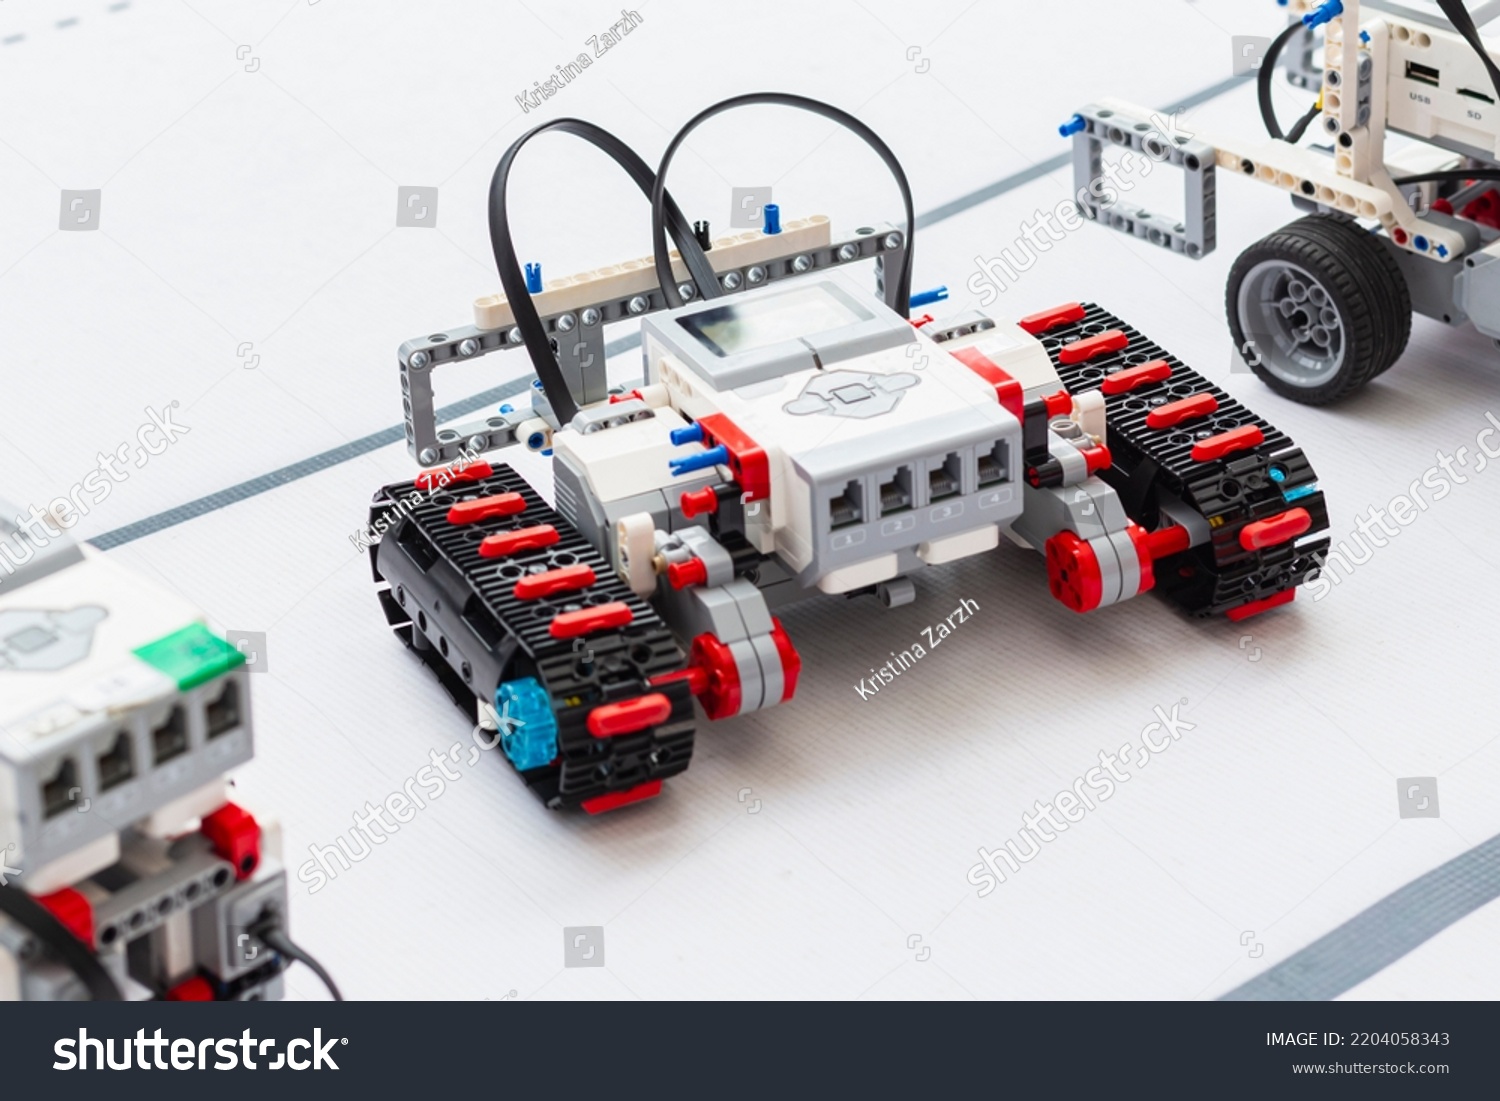 Building model RC robots concept. Caterpillar model of radio-controlled self-propelled vehicle.Radio control robot assembly on white desk. Professional toy RC models of robots. Natural lighting. #2204058343